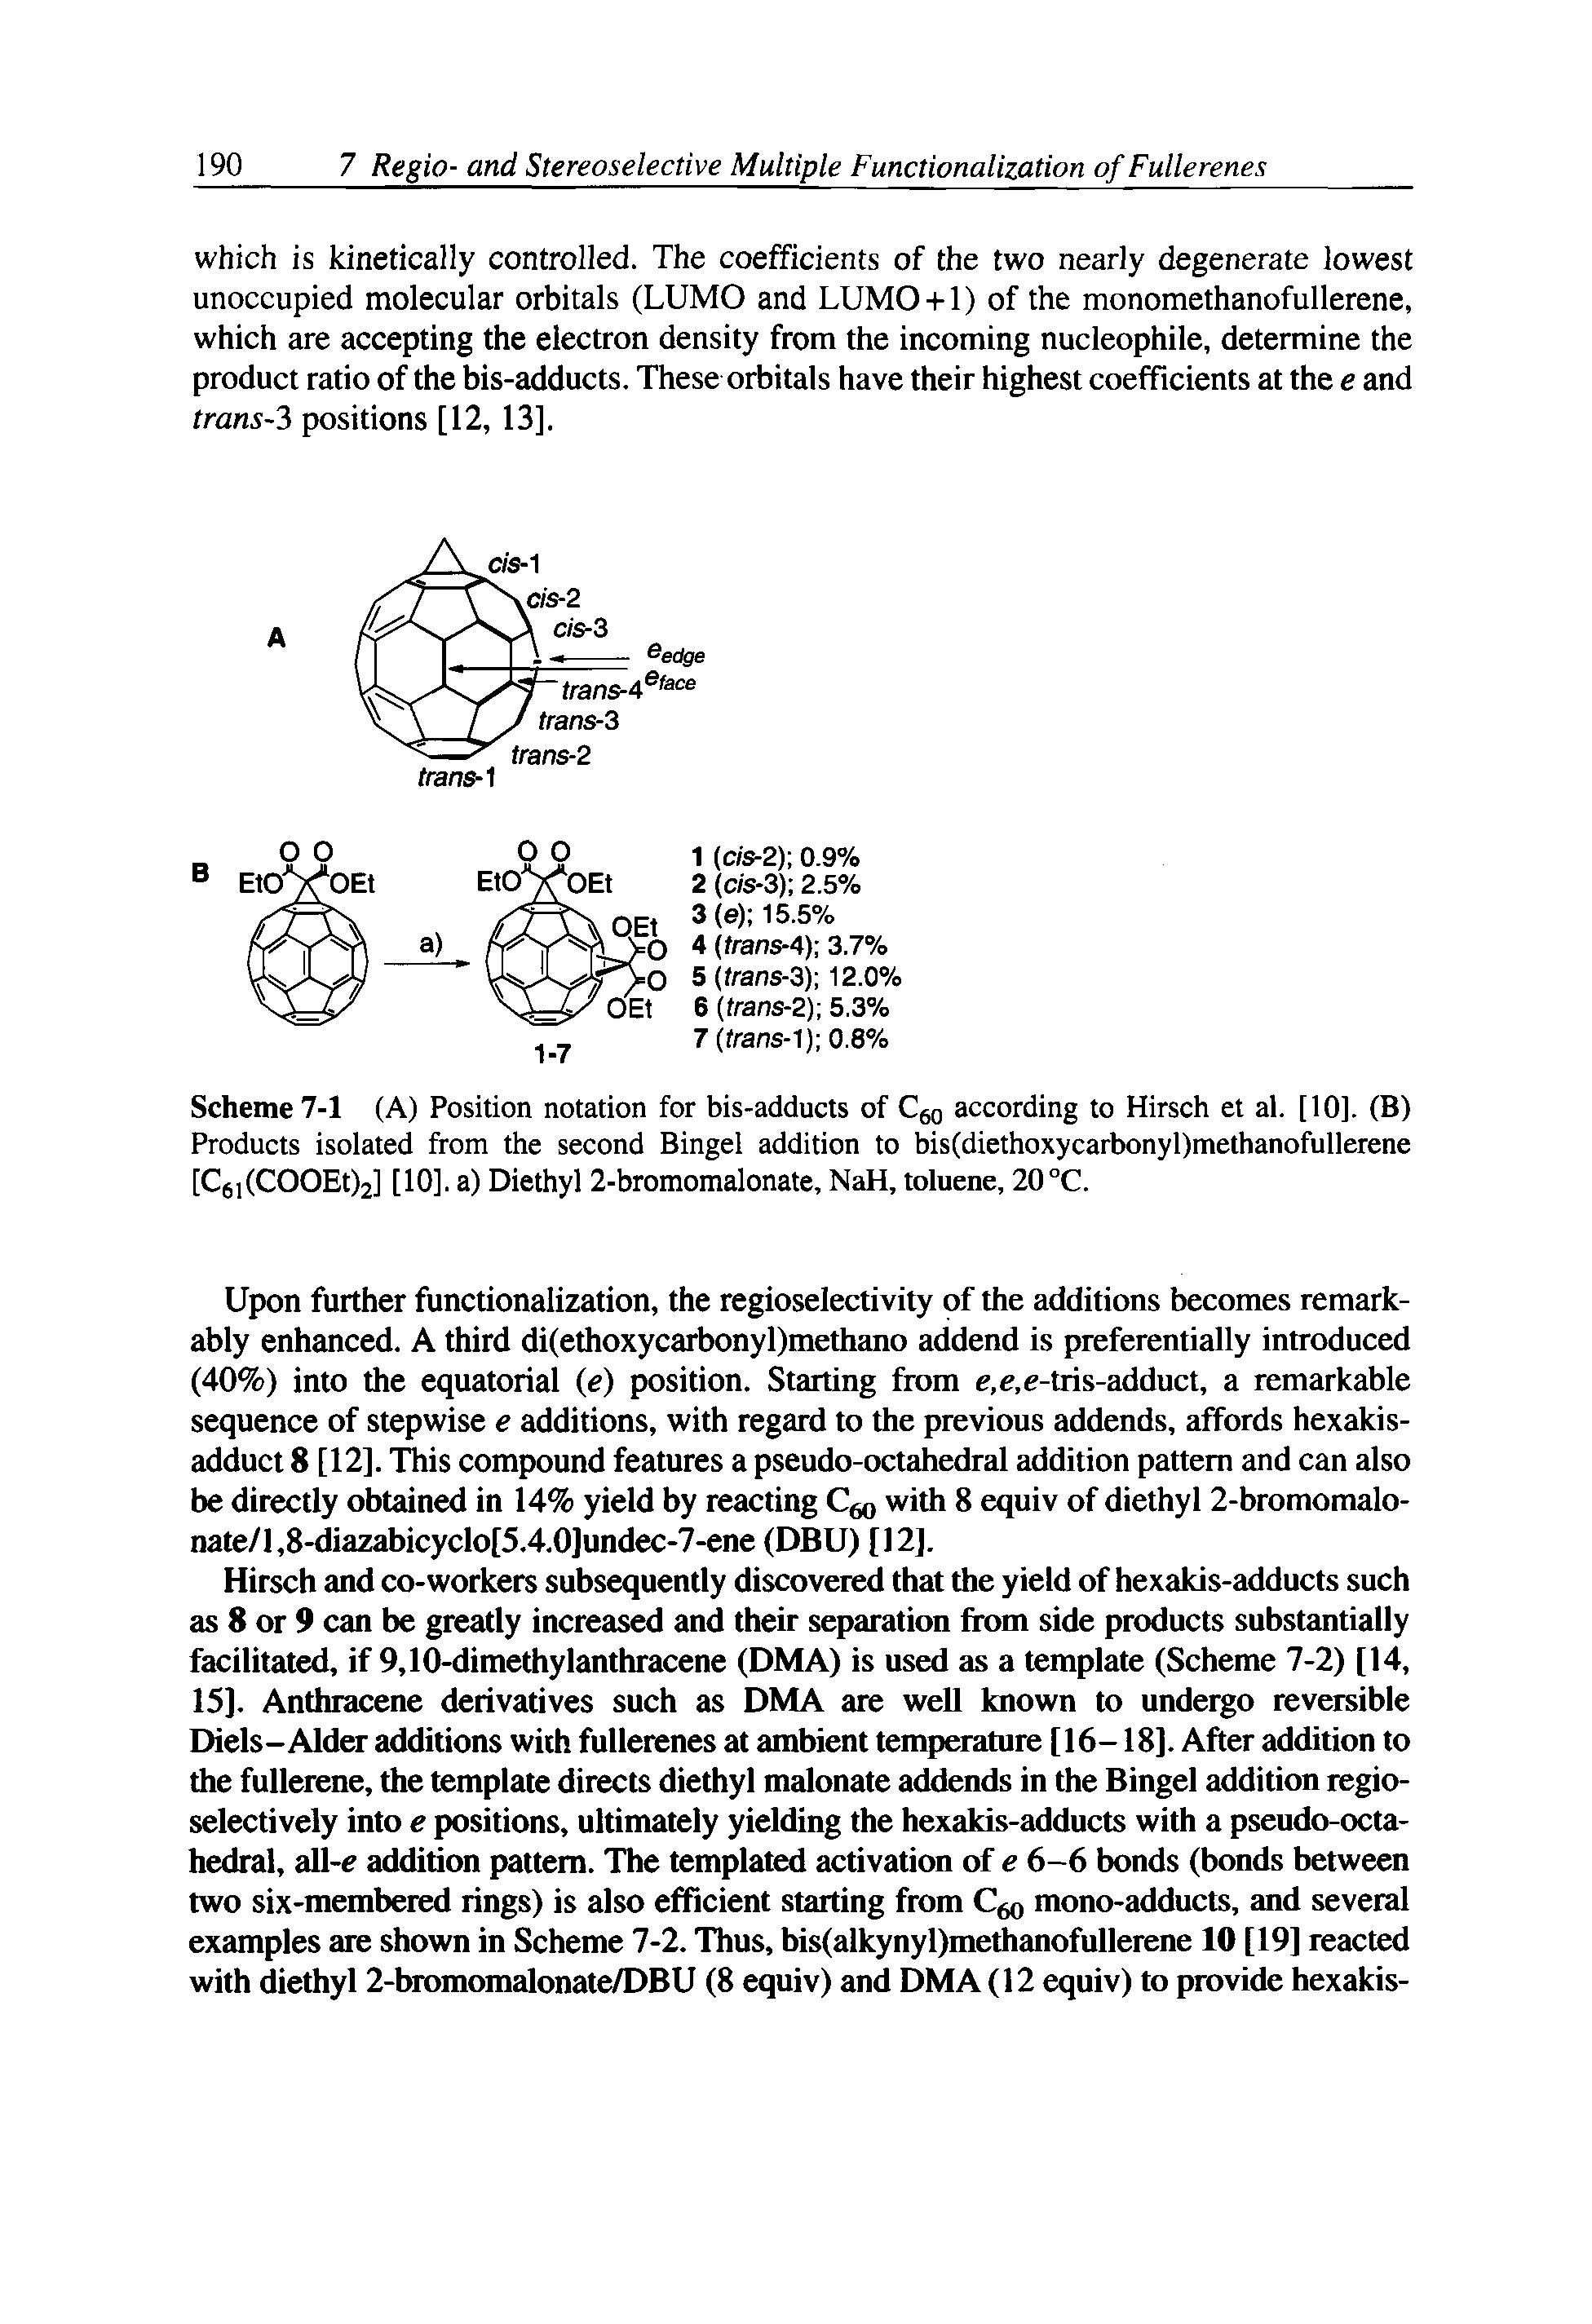 Scheme 7-1 (A) Position notation for bis-adducts of Cgg according to Hirsch et al. [10]. (B) Products isolated from the second Bingel addition to bis(diethoxycarbonyl)methanofullerene [C6i(COOEt)2l [10]. a) Diethyl 2-bromomalonate, NaH, toluene, 20°C.